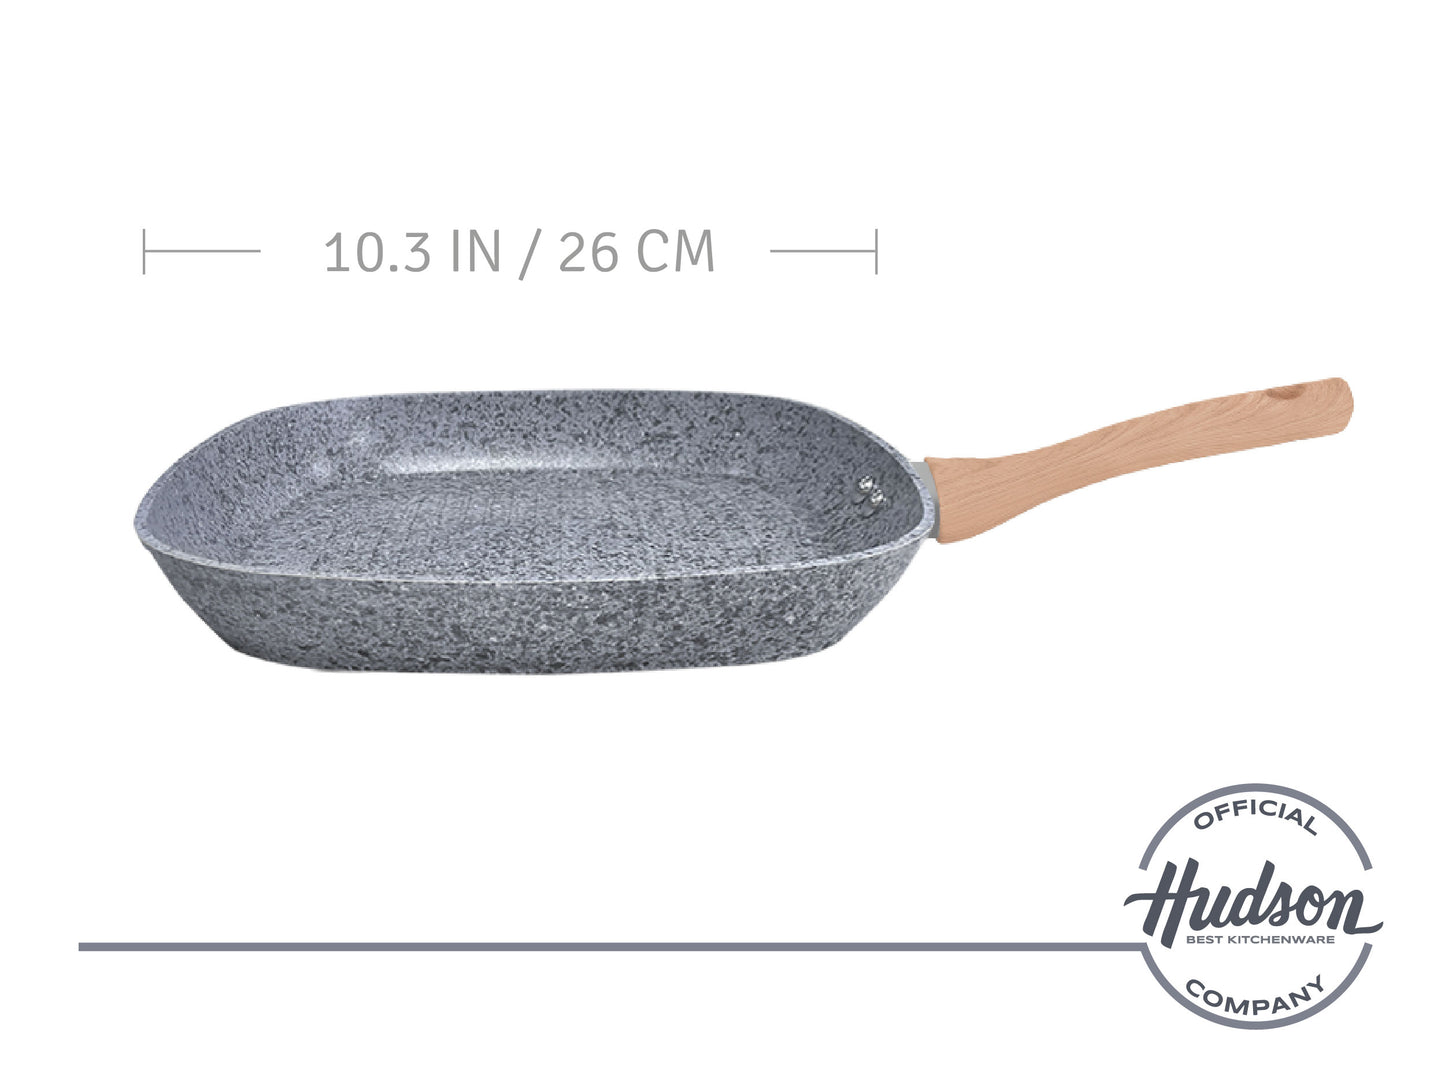 HUDSON Forged Nonstick Grill Pan 3.9Qt Cookware, Pots, and Pans, Dishwasher Safe